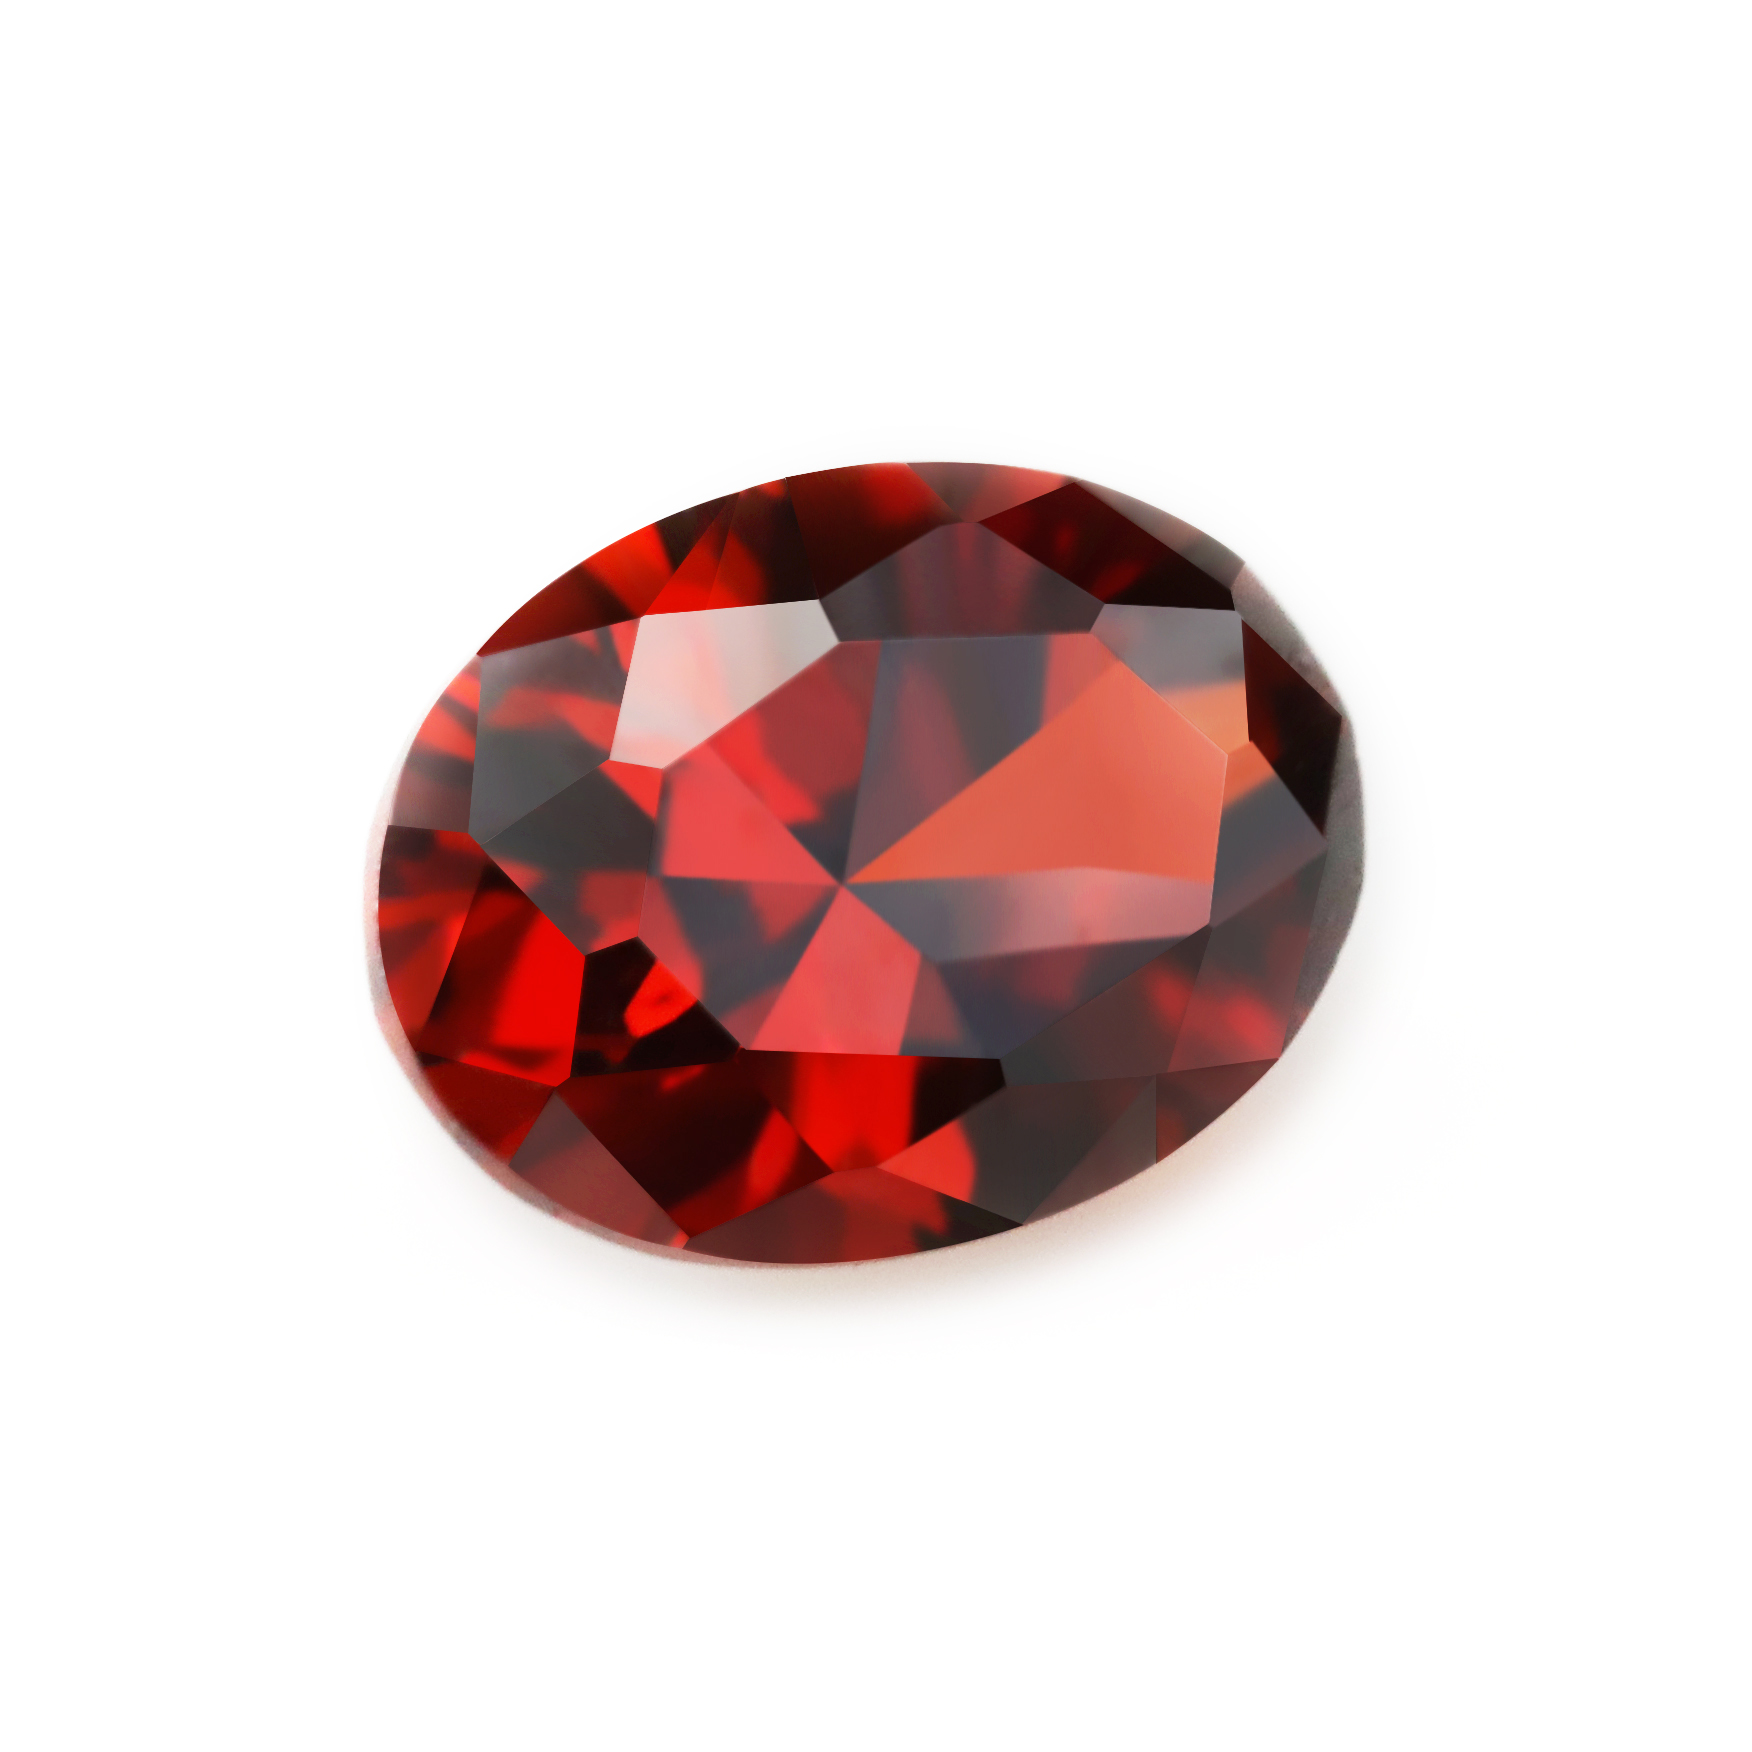 5Pcs January February April June August October November Imitation Garnet Birthstone Oval Faceted Cubic Zirconia CZ Stone DIY Loose Stone Supplies 4120142-1 - Click Image to Close